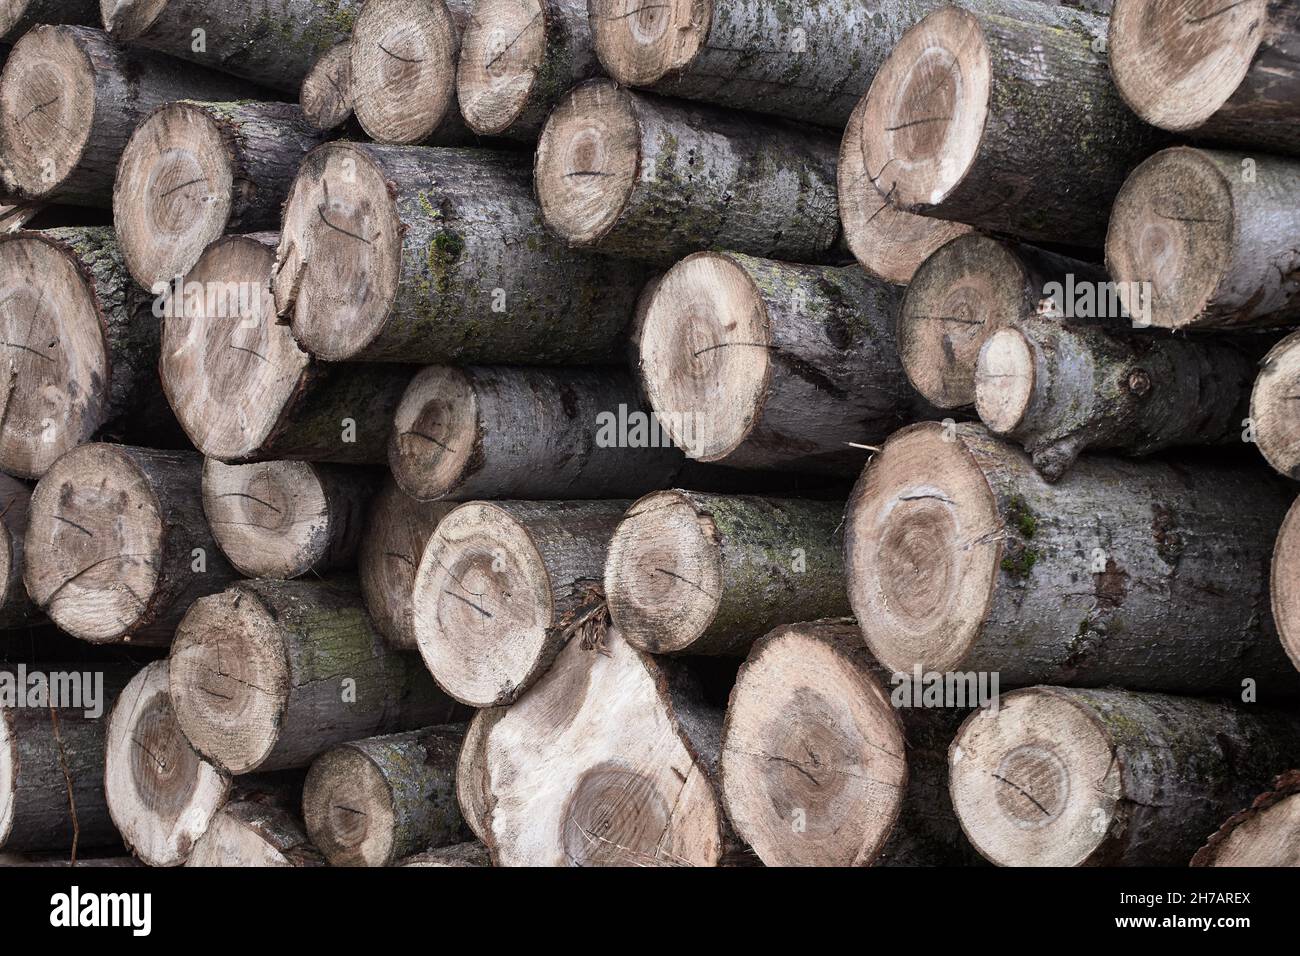 Close-up of a wood pile. Stock Photo